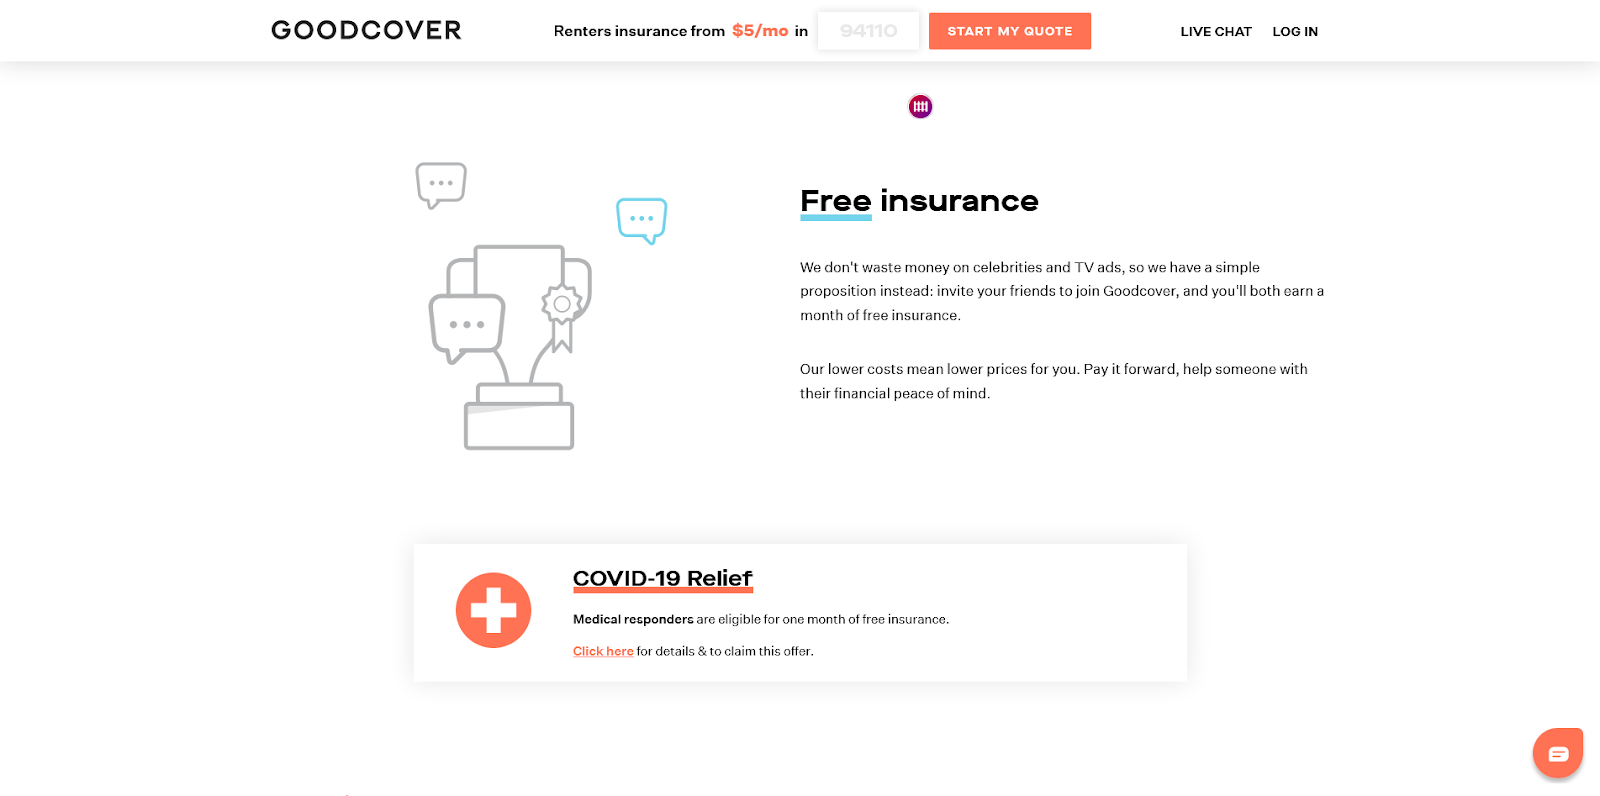 Goodcover’s Free Insurance and COVID-19 Relief Discounts